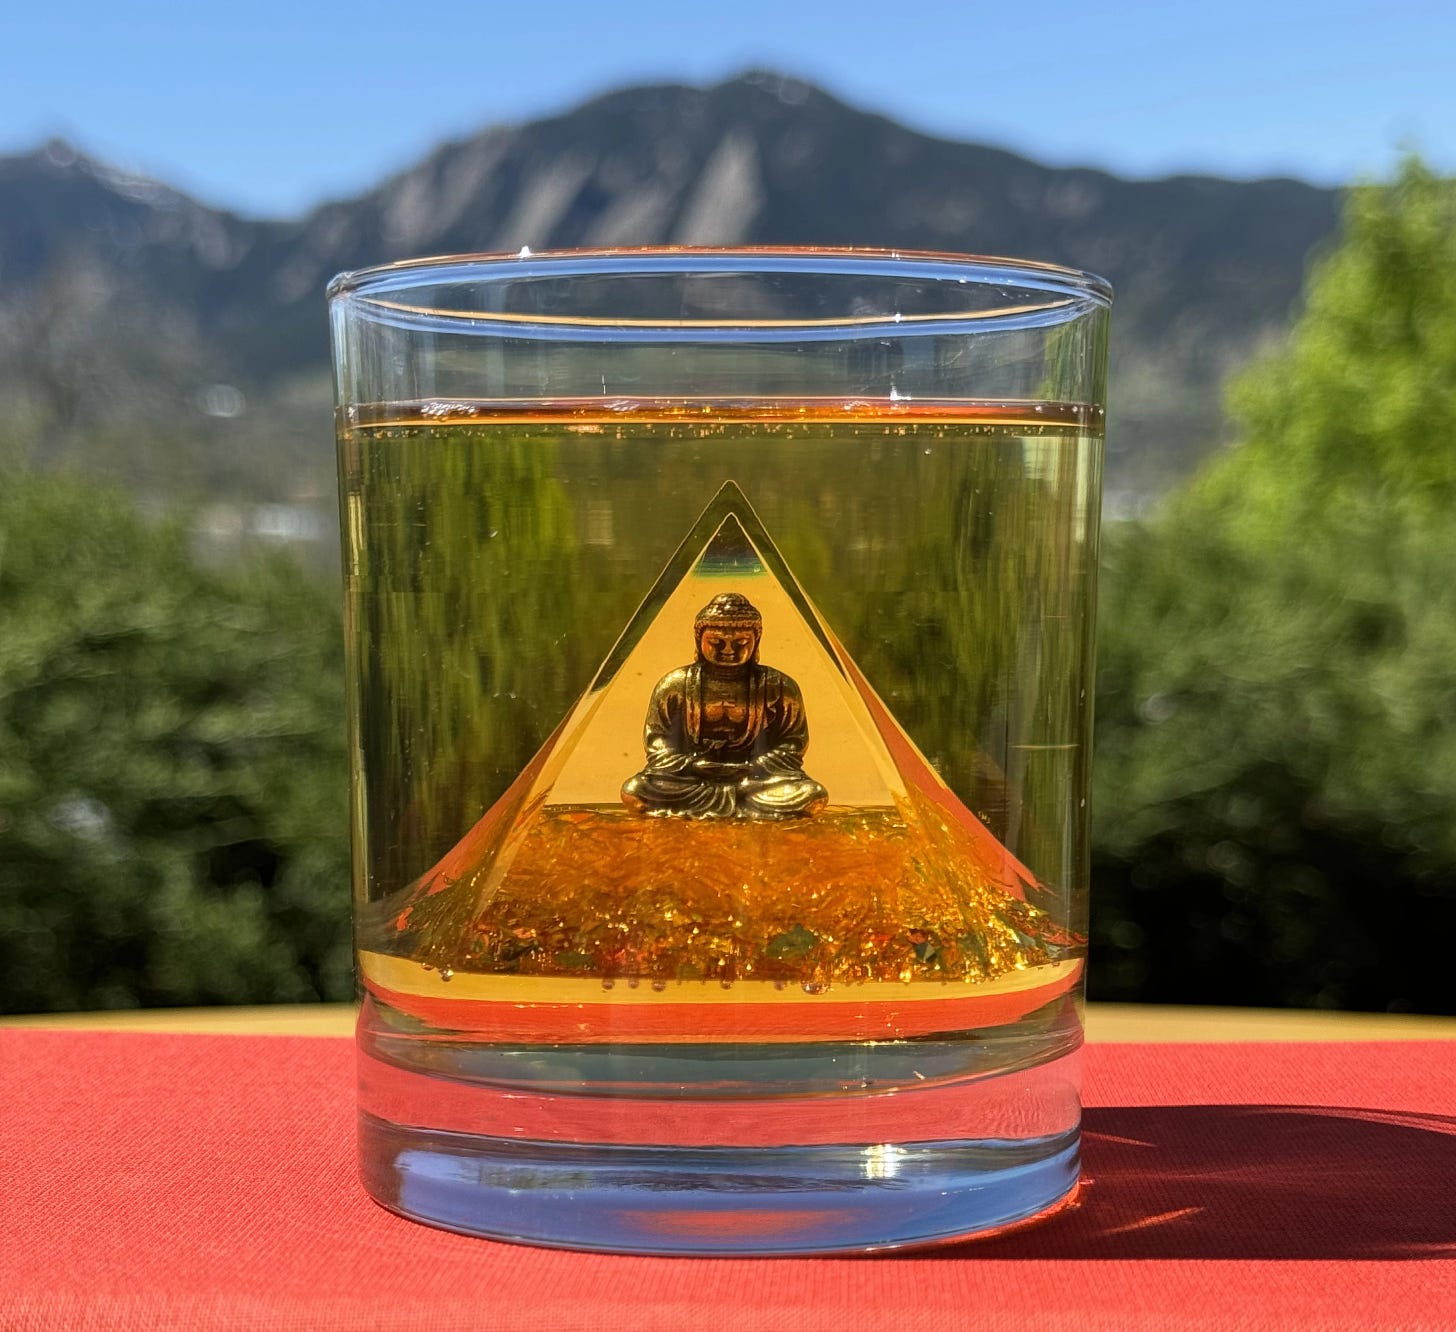 A Buddha statue submerge in a glass of yellow liquid